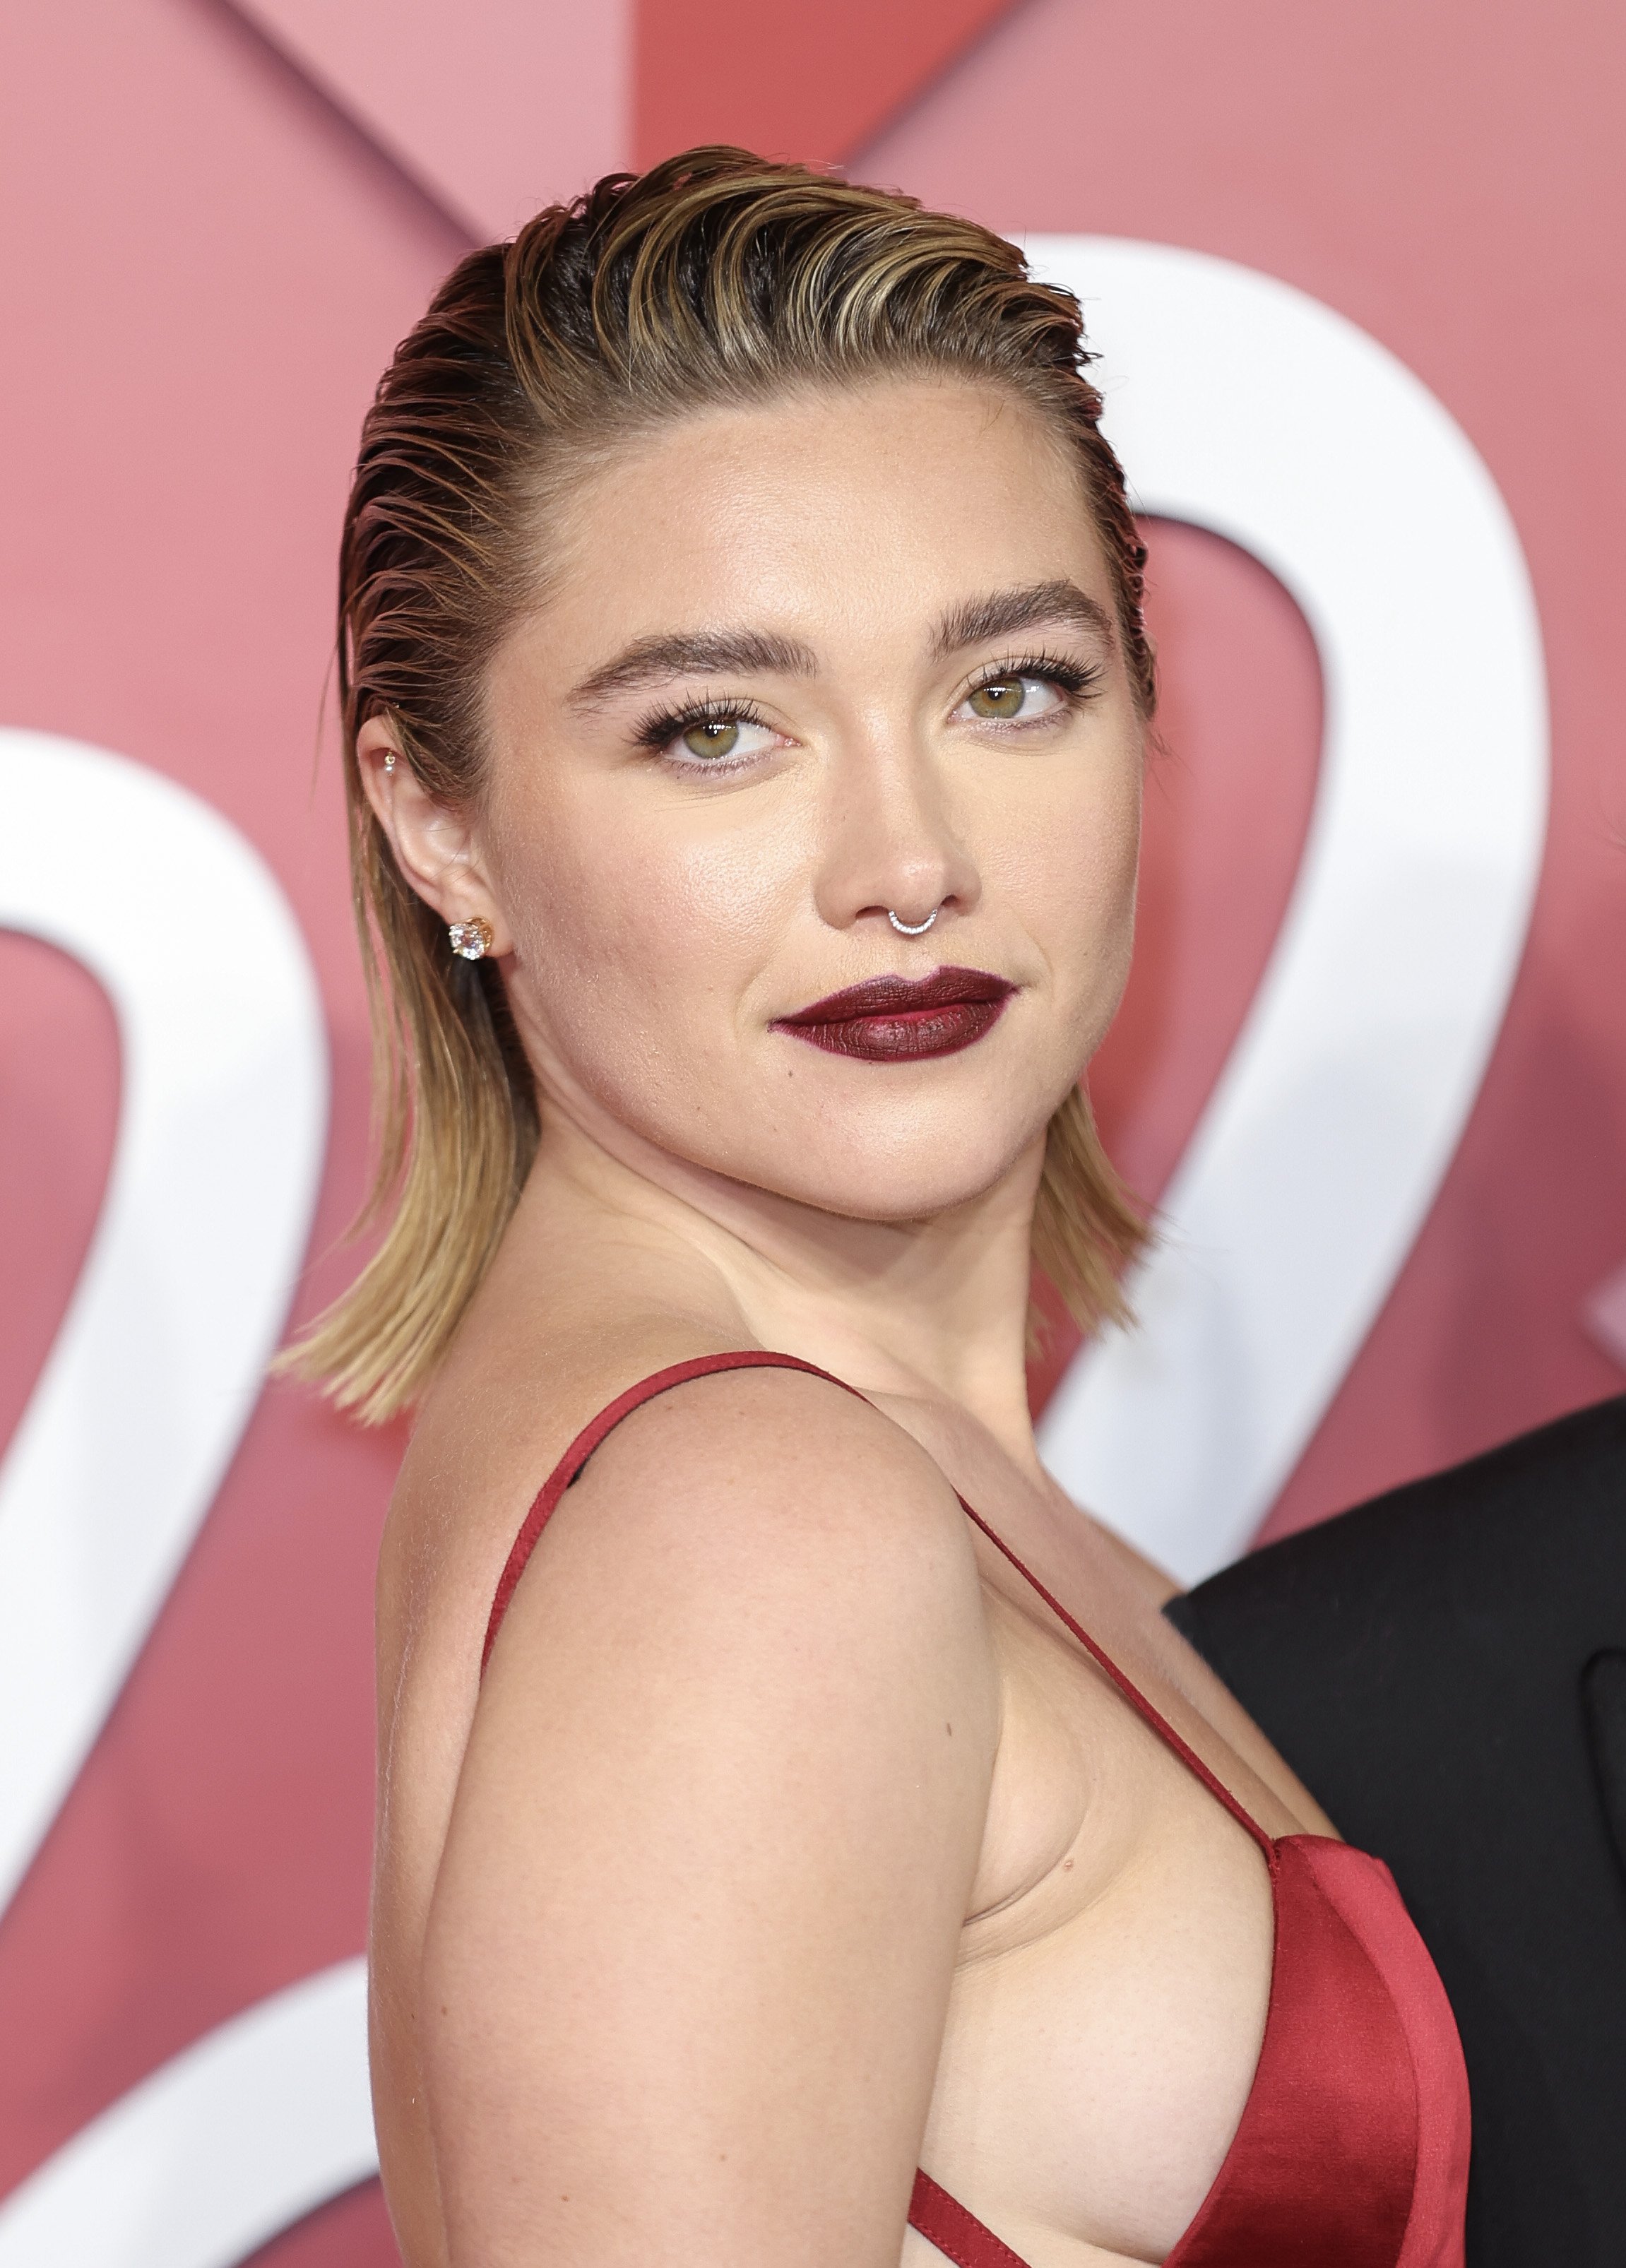  Florence Pugh at The Fashion Awards 2022 in London, England. | Source: Getty Images